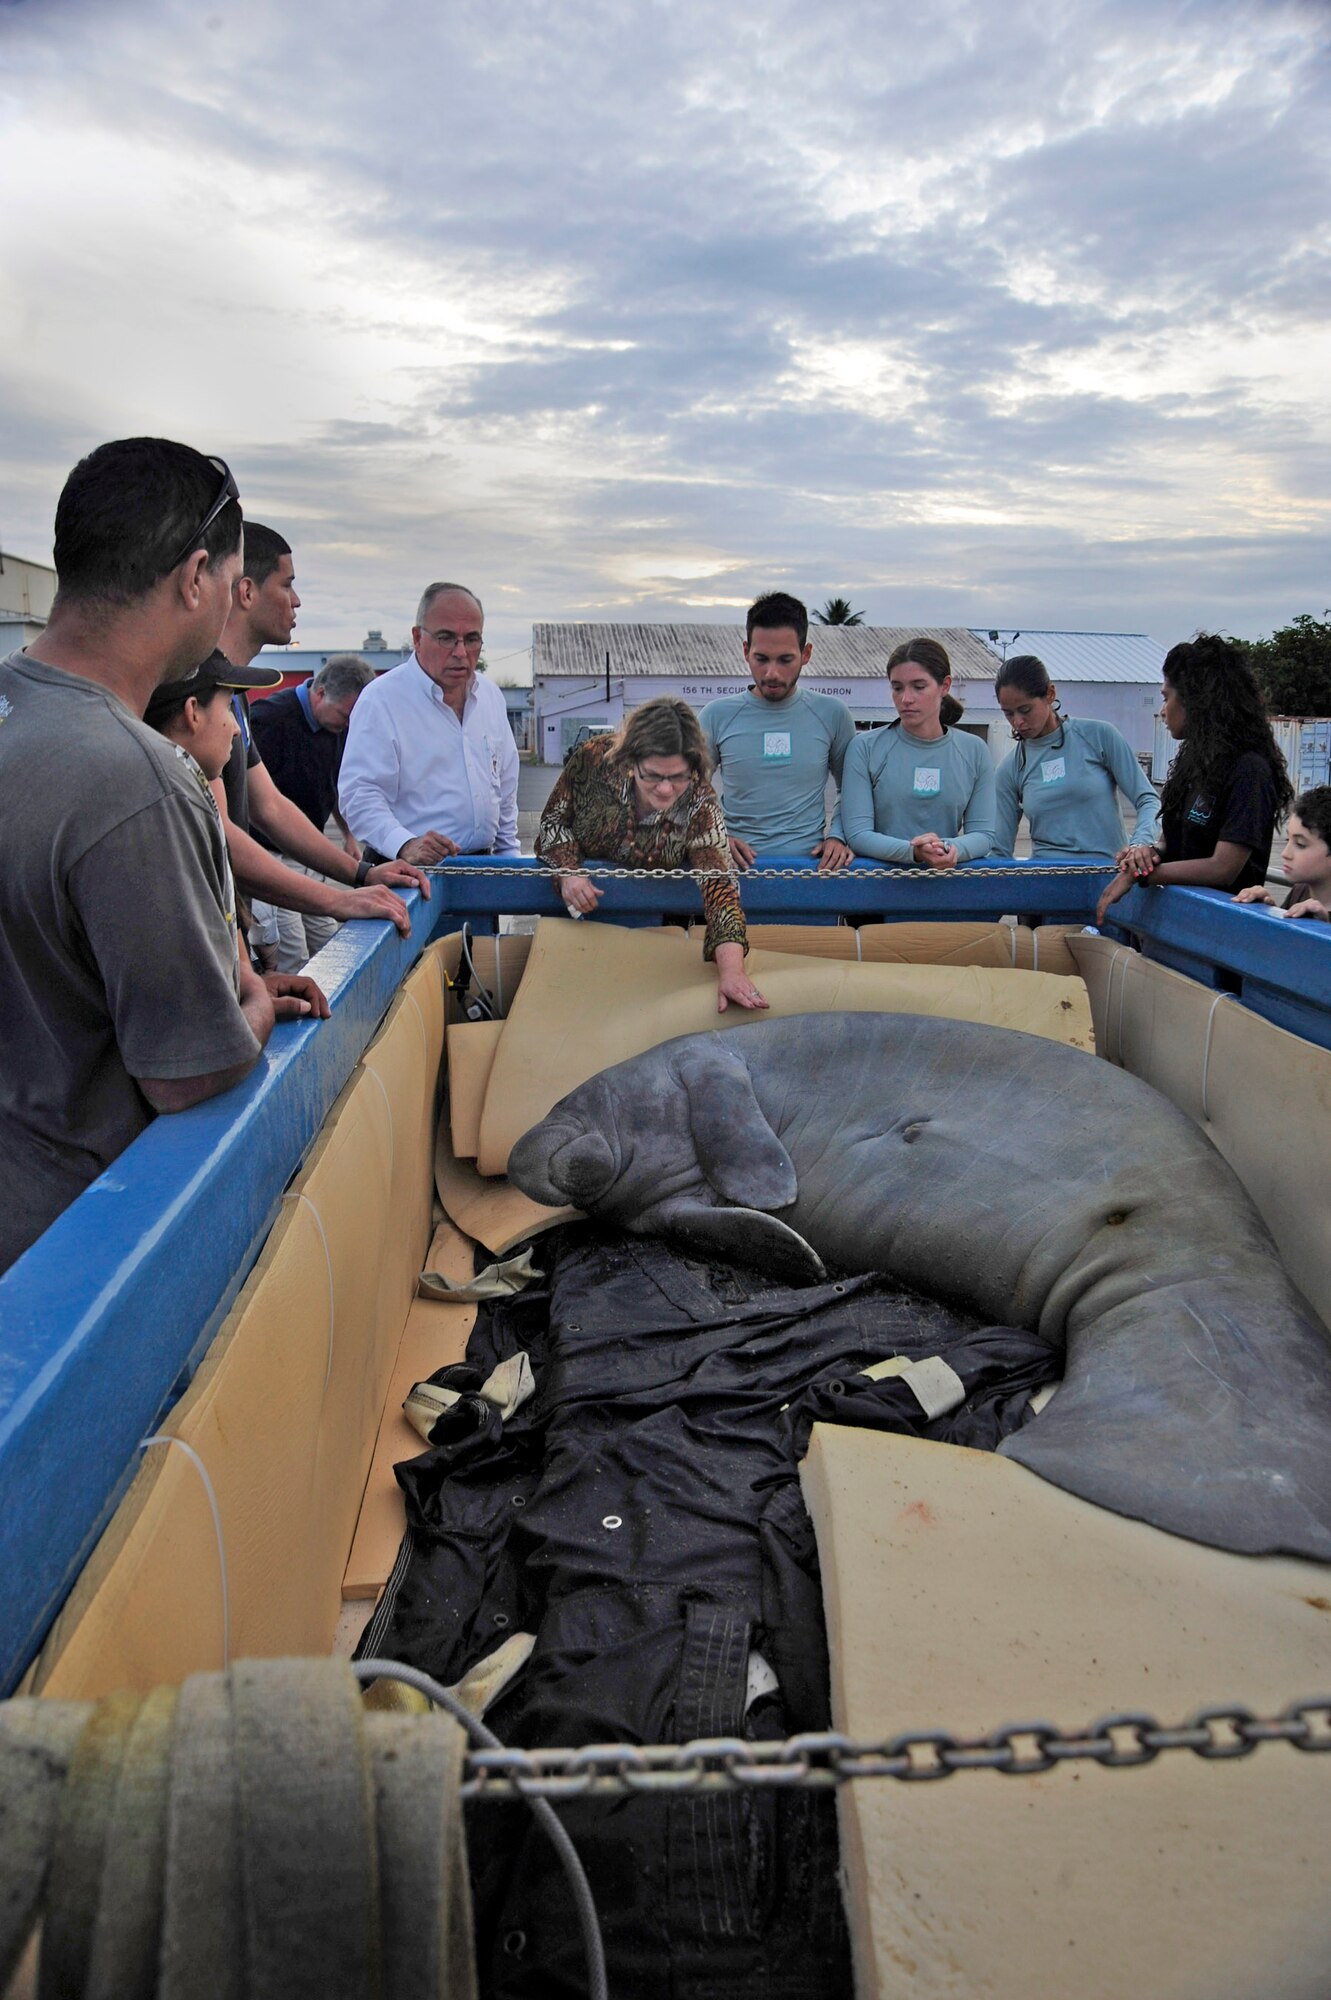 Guacara, the manatee, is greeted by locals after arriving in San Juan, Puerto Rico, Dec 9, 2010, An aircrew from the Puerto Rico Air National Guard’s 156th Airlift Wing transported the manatee from MacDill Air Force Base, Fla., aboard a C-130 Hercules. The manatee was being transported to its new home in the Puerto Rico Zoo (U.S. Air Force photo/Staff Sgt. Angela Ruiz)